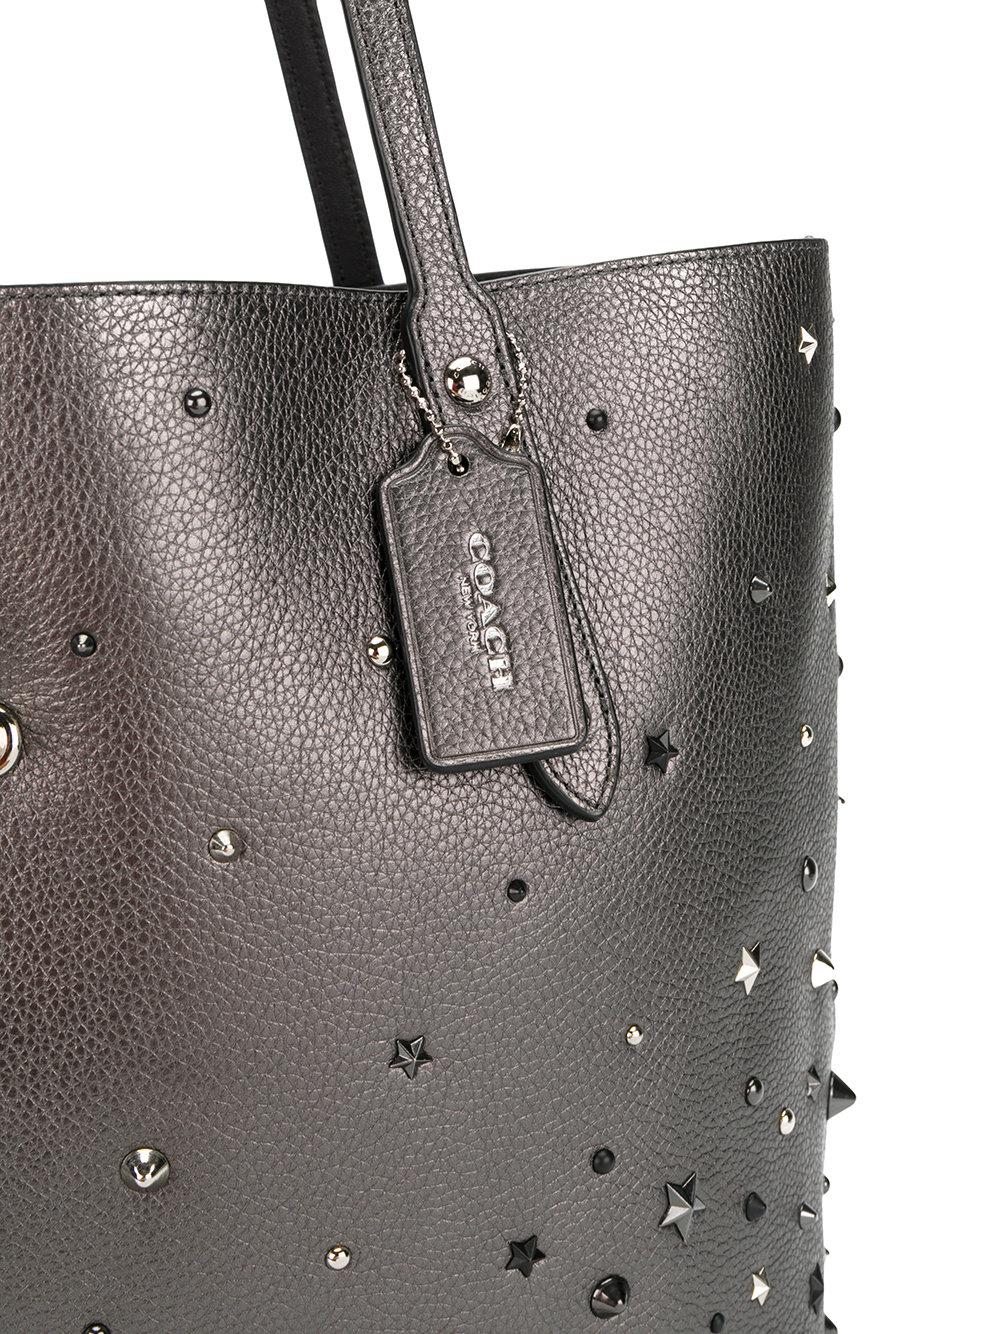 COACH Studded Tote Bag in Metallic | Lyst